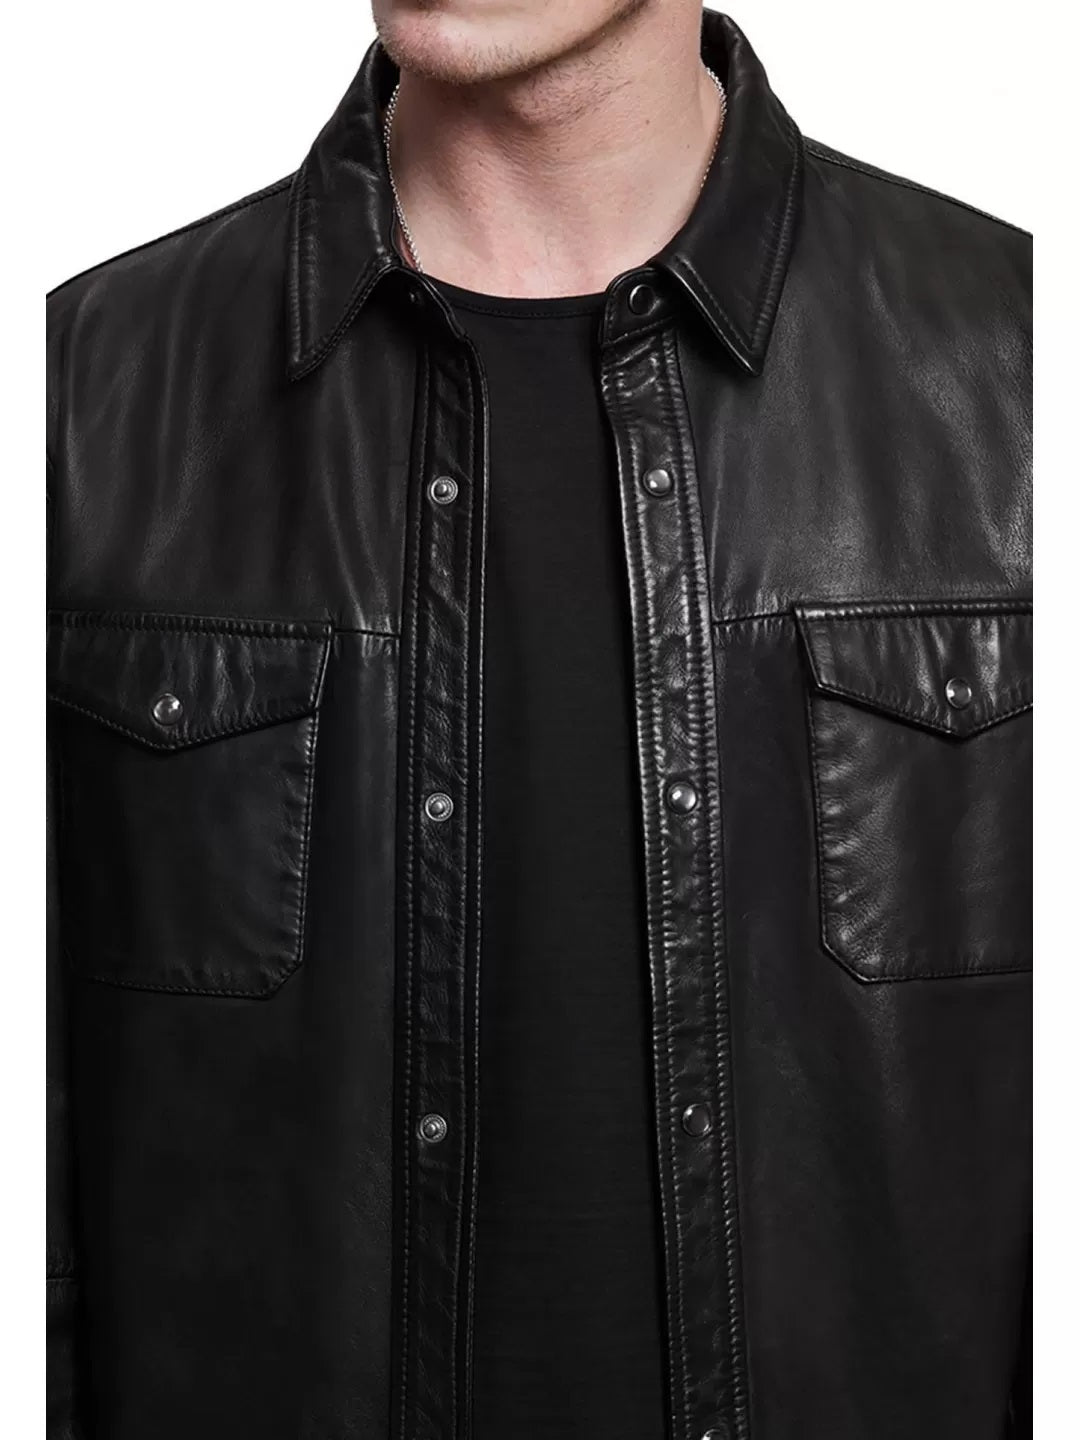 Men's Real Vintage Lamb Leather Full Sleeves Black Leather Shirt With Pockets